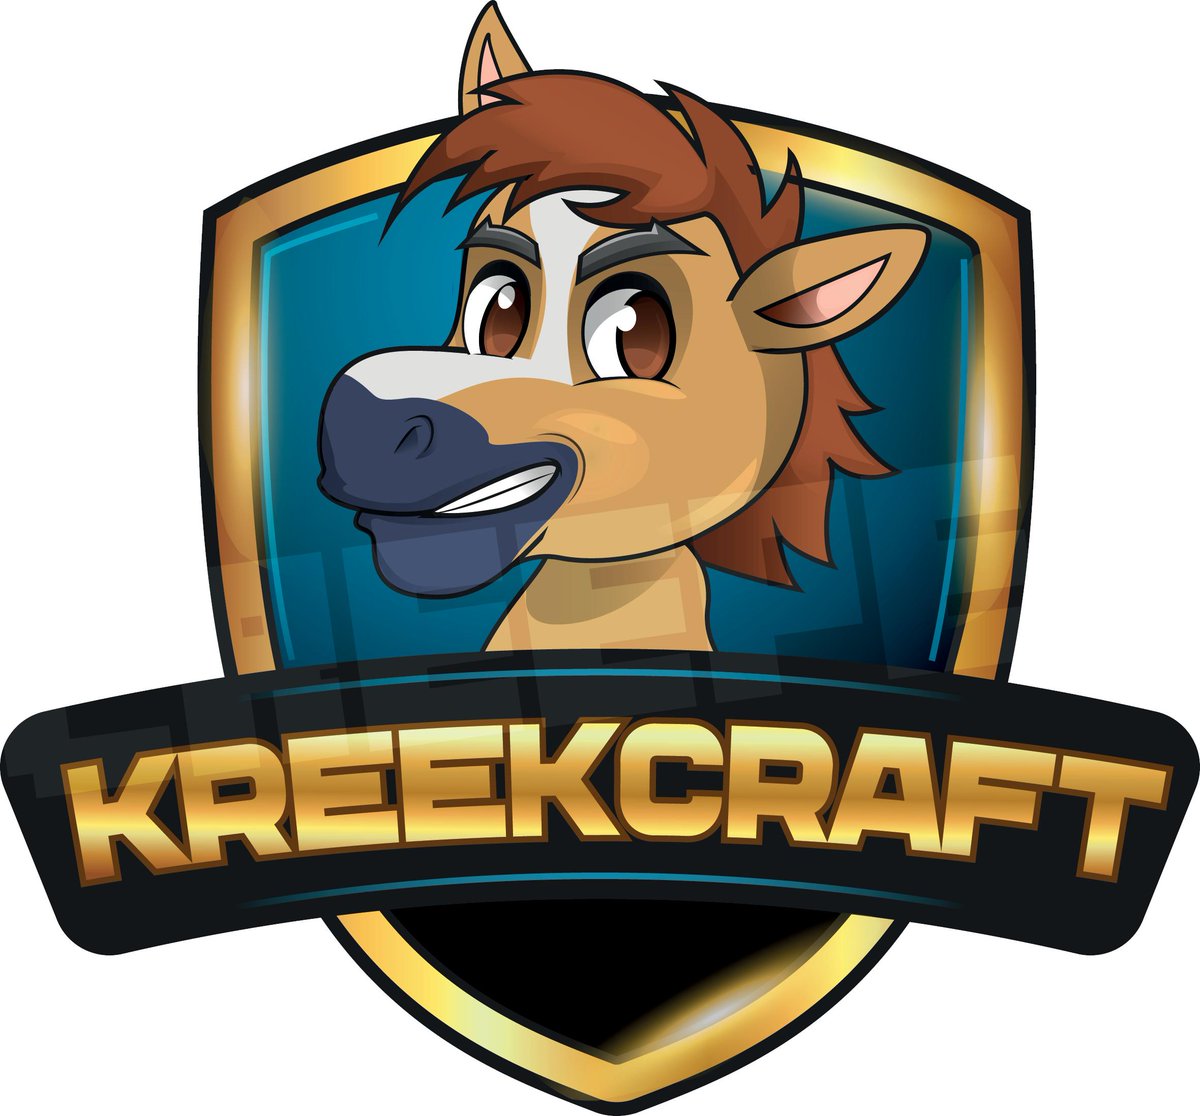 Kreekcraft On Twitter No More Baby Trevor Credit To The